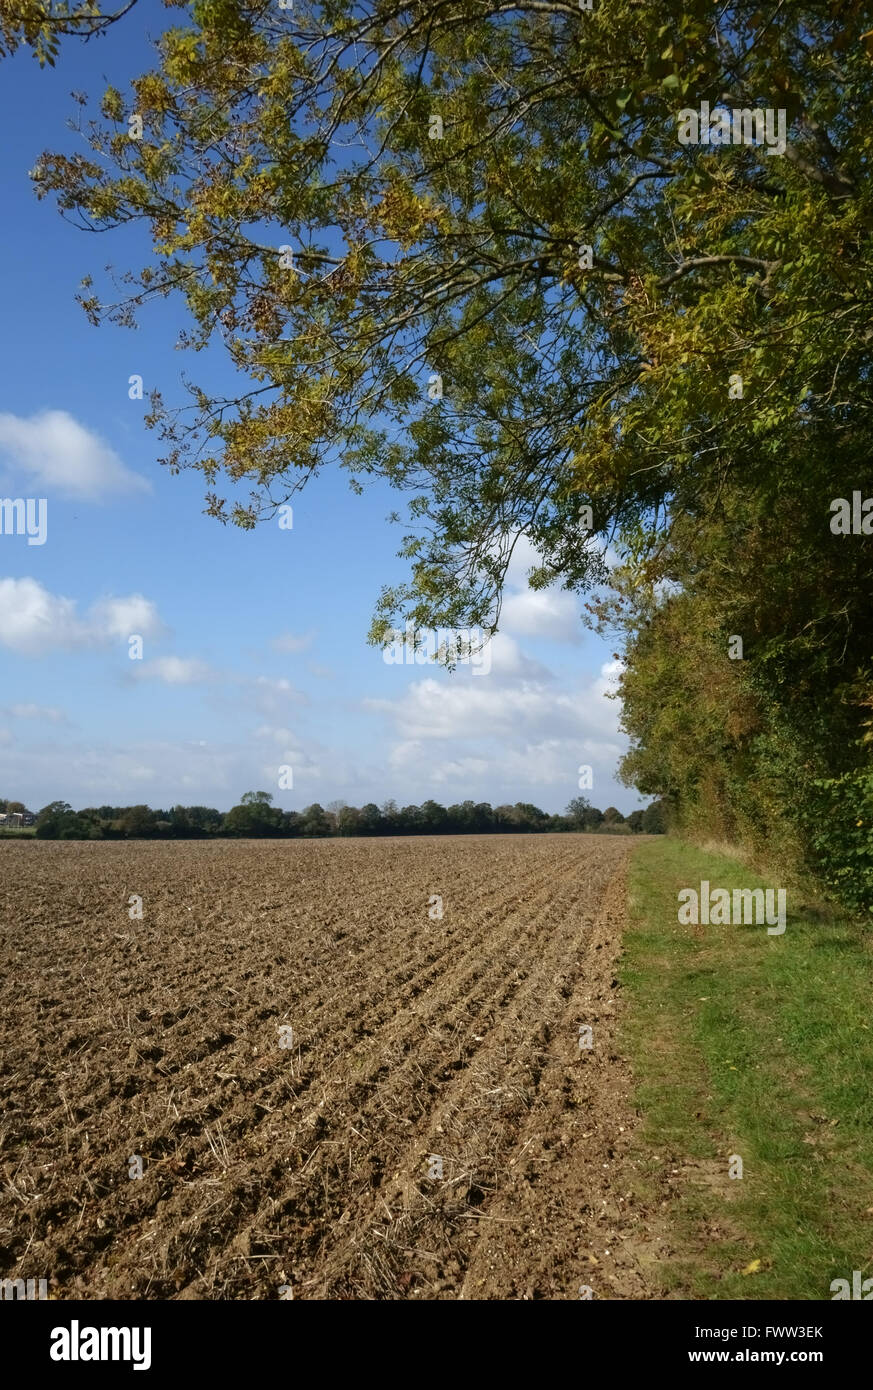 Newly drilled minimally cultivated seedbed for a cereal crop with trees changing to autumn colours, Berkshire, October Stock Photo